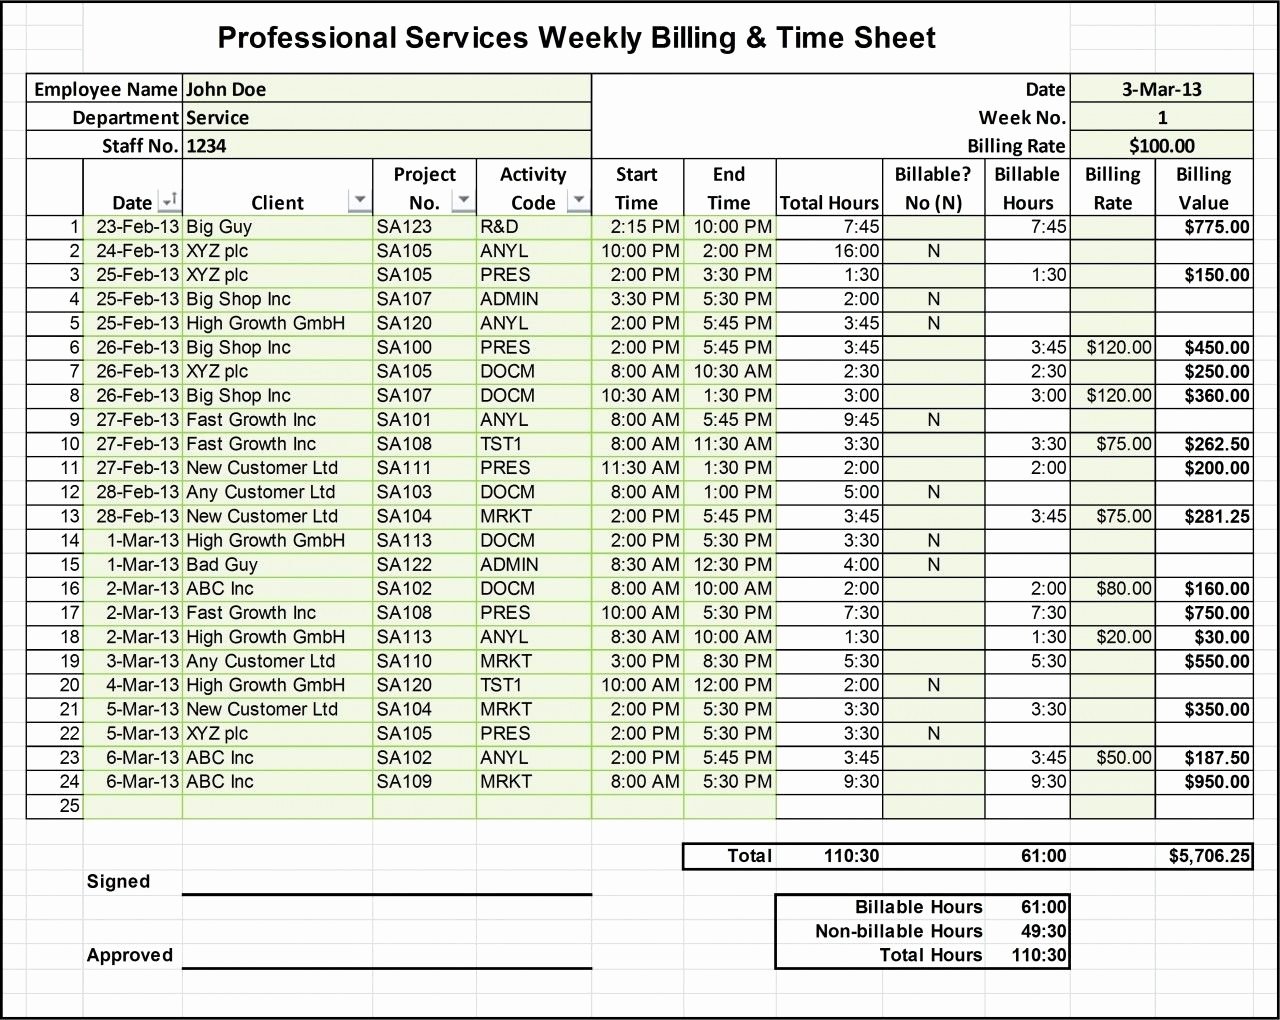 Timesheet Invoice Template Excel Elegant Professional Services Billing Timesheet Excel Template